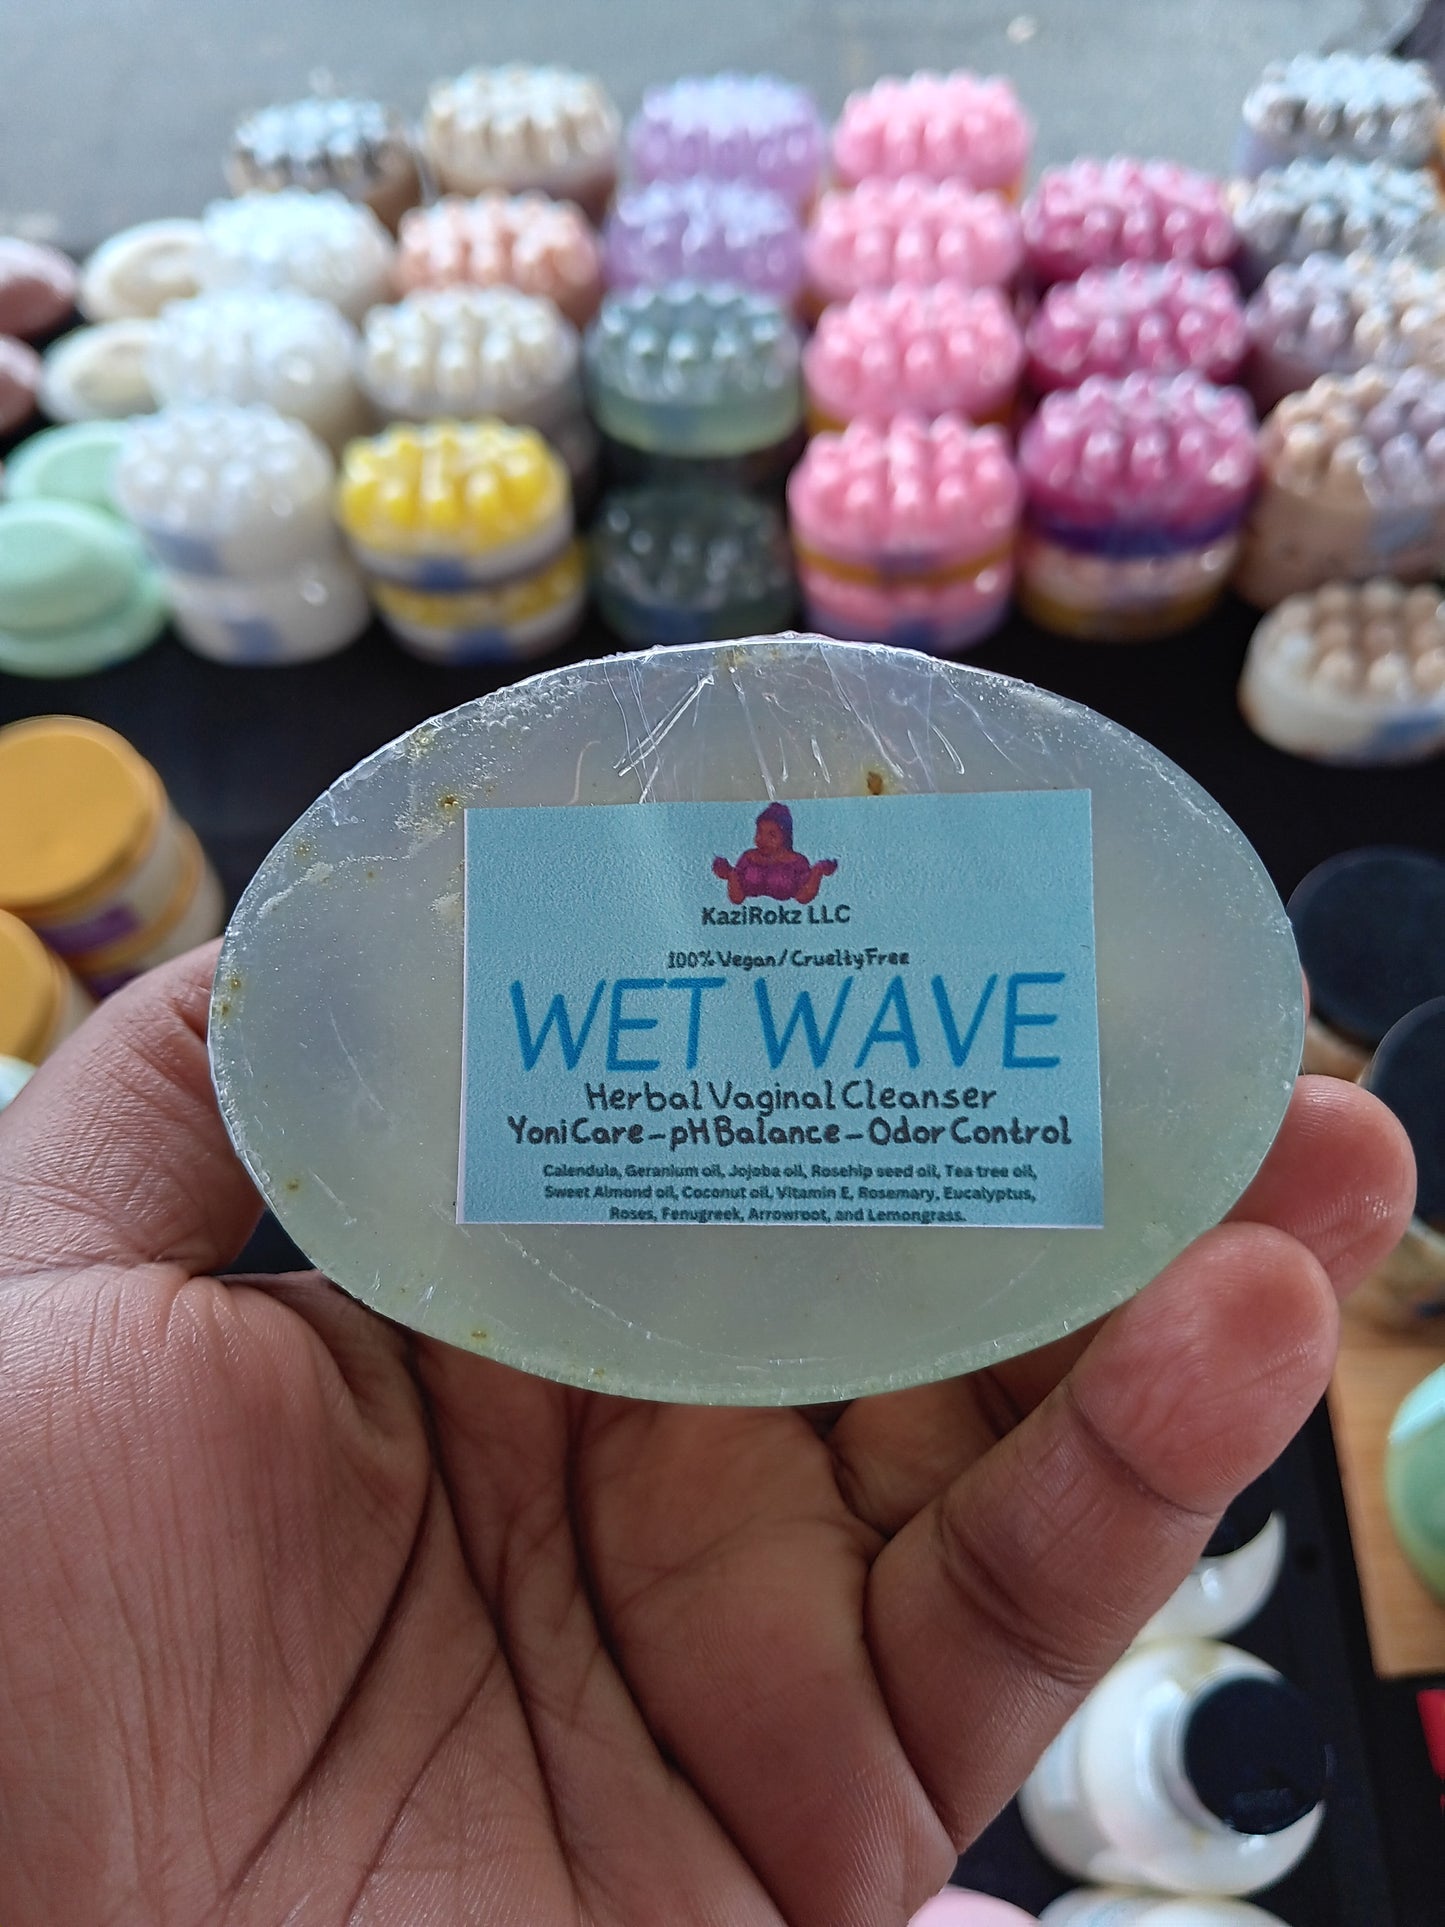 WET WAVE YONI SOAP BAR 5oz. Herbal vaginal cleanser (100% Vegan / CrueltyFree)! All natural and organic pH balance and Odor control